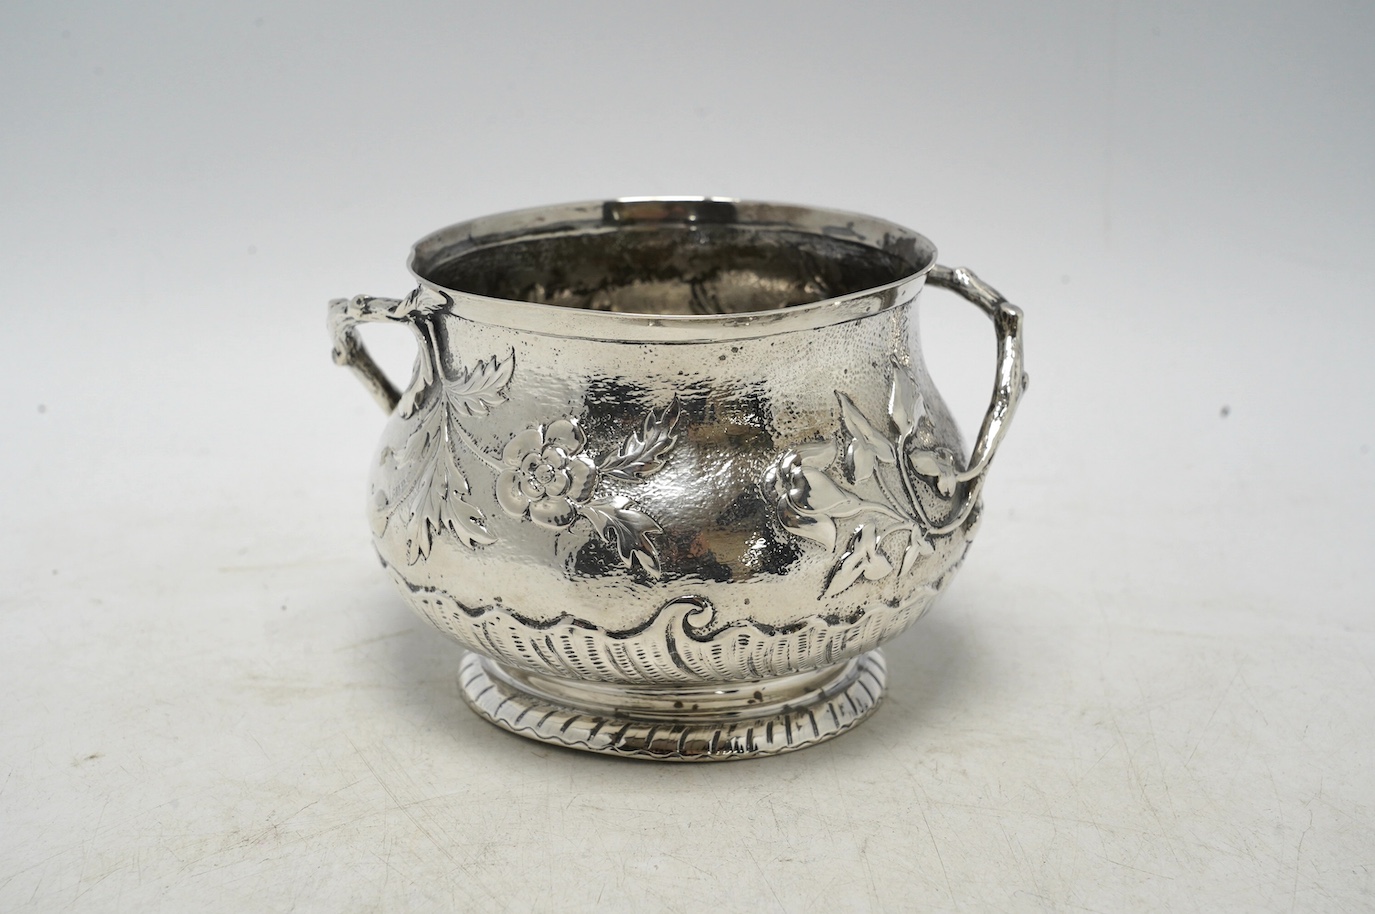 A late Victorian silver two handled sugar bowl, by Carrington & Co, London 1900, 7.3oz. Condition - poor to fair